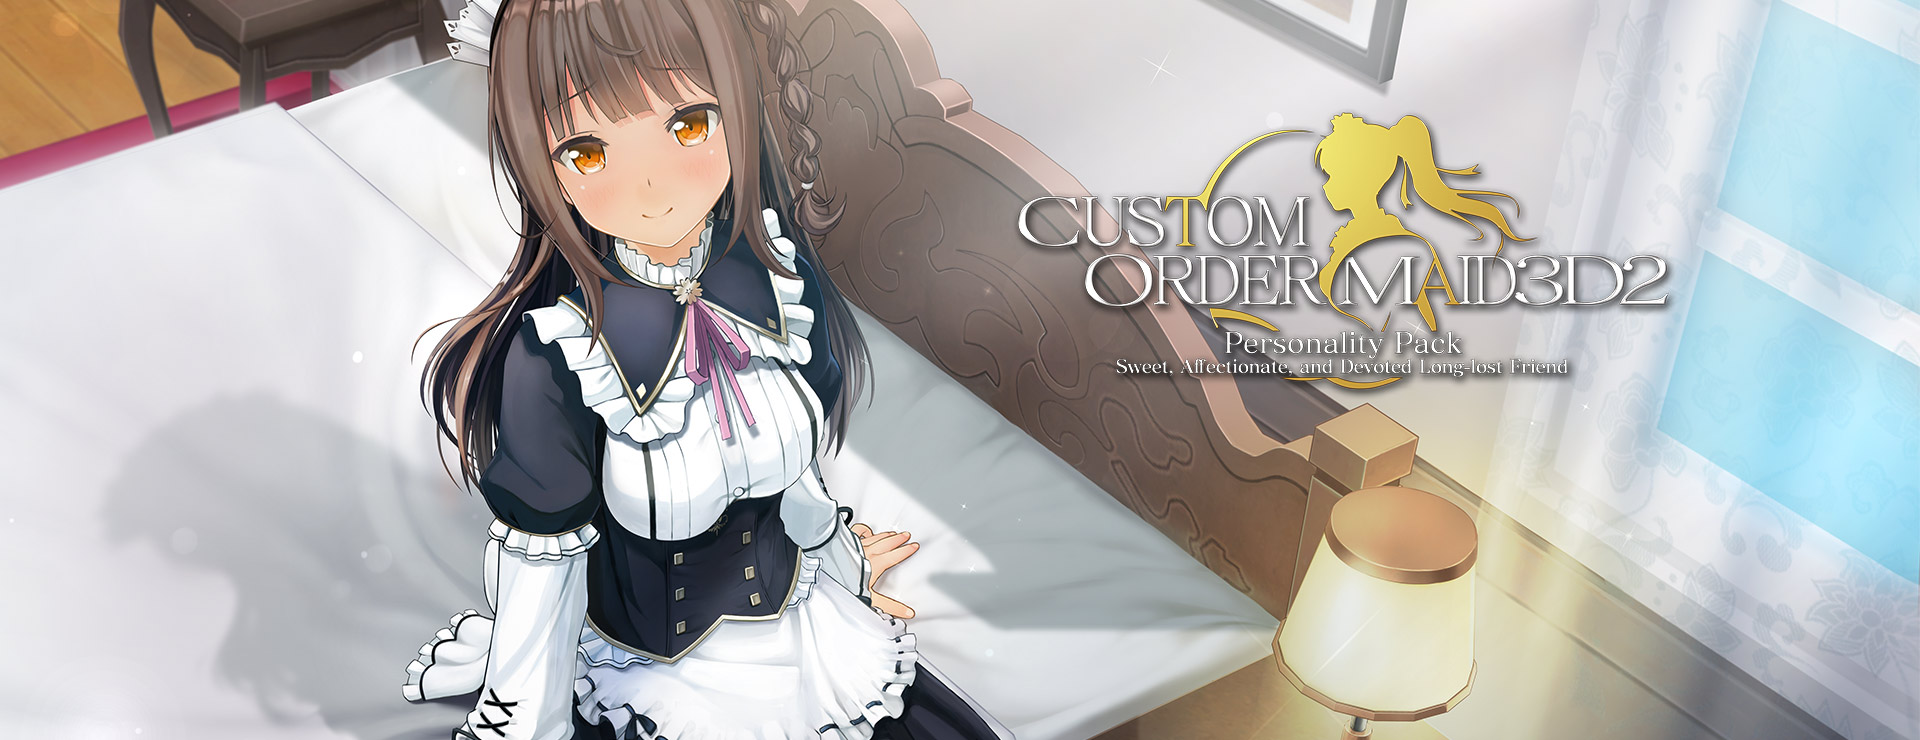 Custom Order Maid 3D 2 - Sweet, Affectionate, and Devoted Long-Lost Friend DLC - Simulación Juego